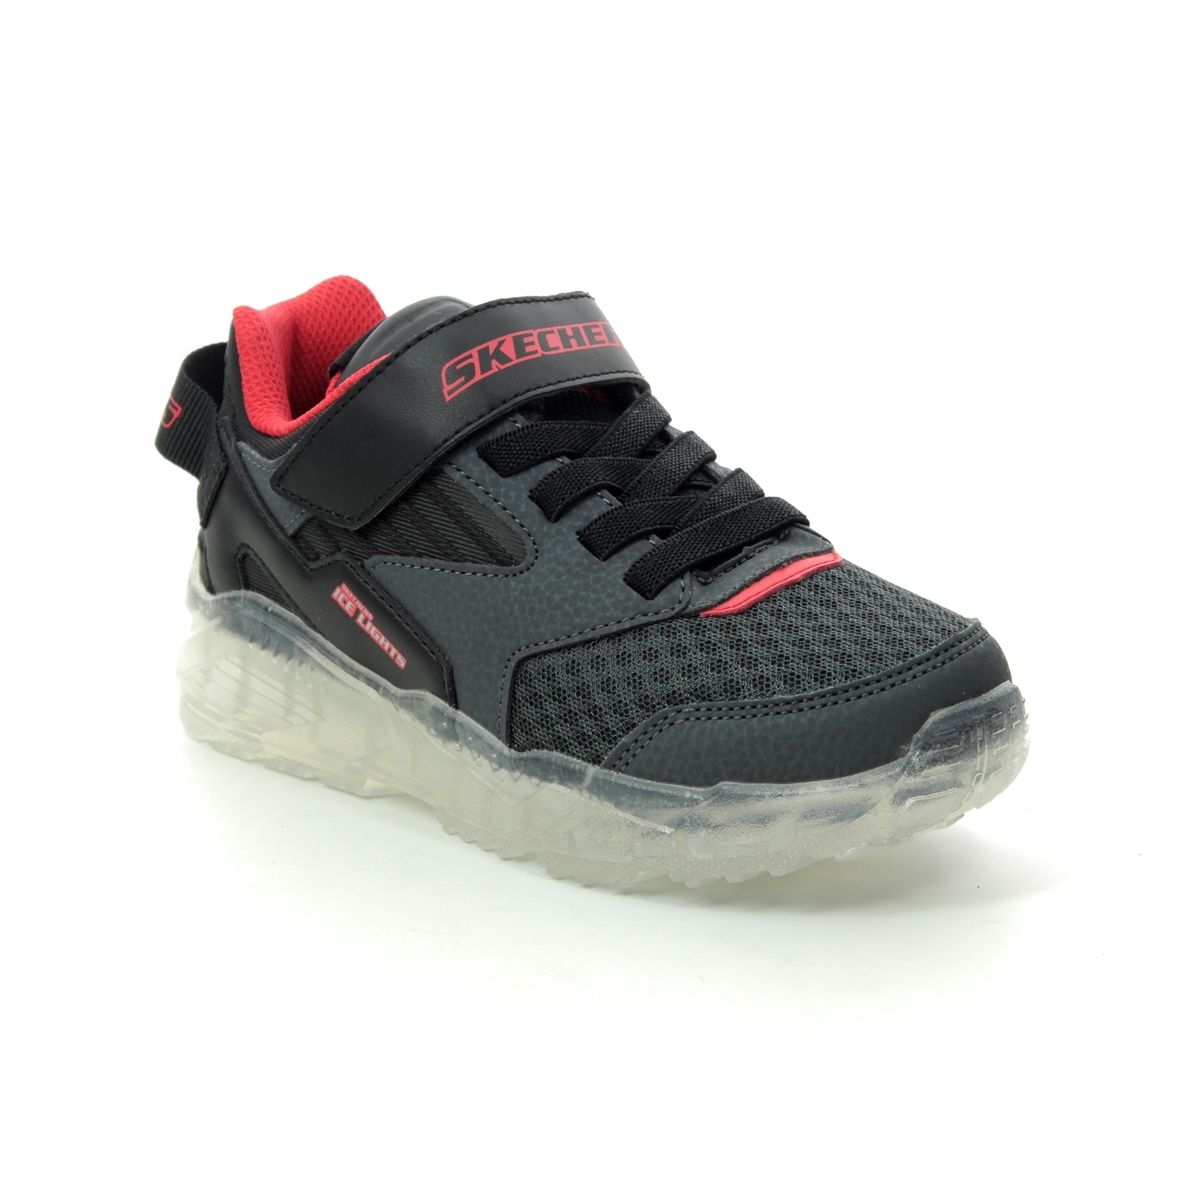 Skechers Arctic Tron Charcoal Black Kids Trainers 90661 In Size 31 In Plain Charcoal Black For kids